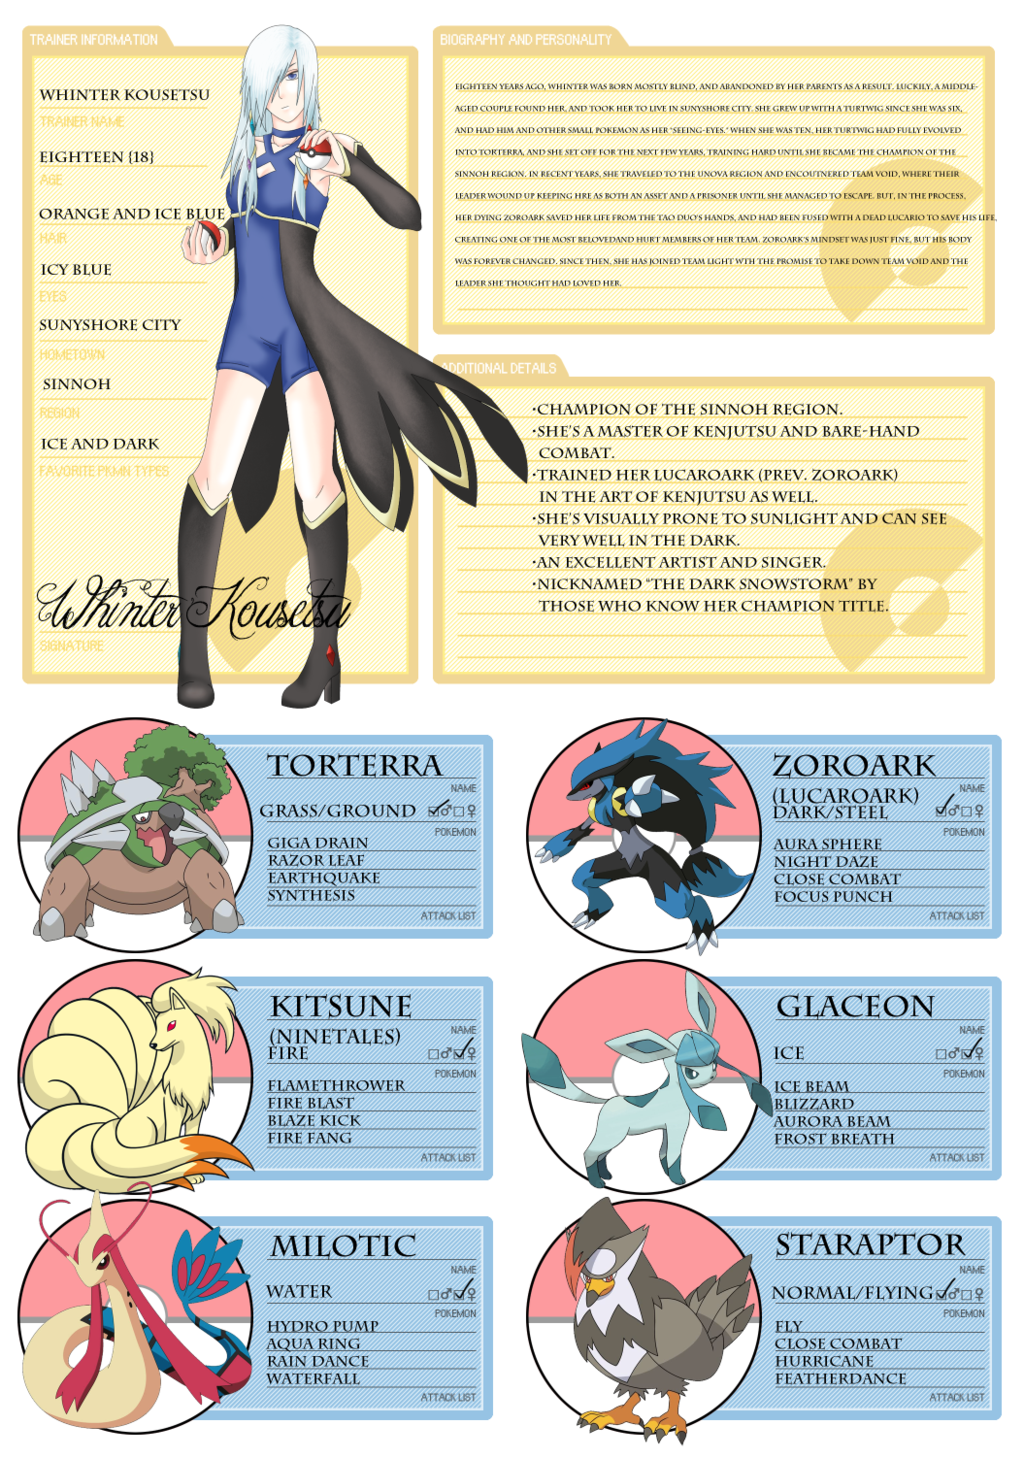 whinter_kousetsu_trainer_card___sinnoh_and_xy_arc_by_orisodehime-d63dsf5 Top 10 World's Most Expensive Pokémon Cards 2018-2019